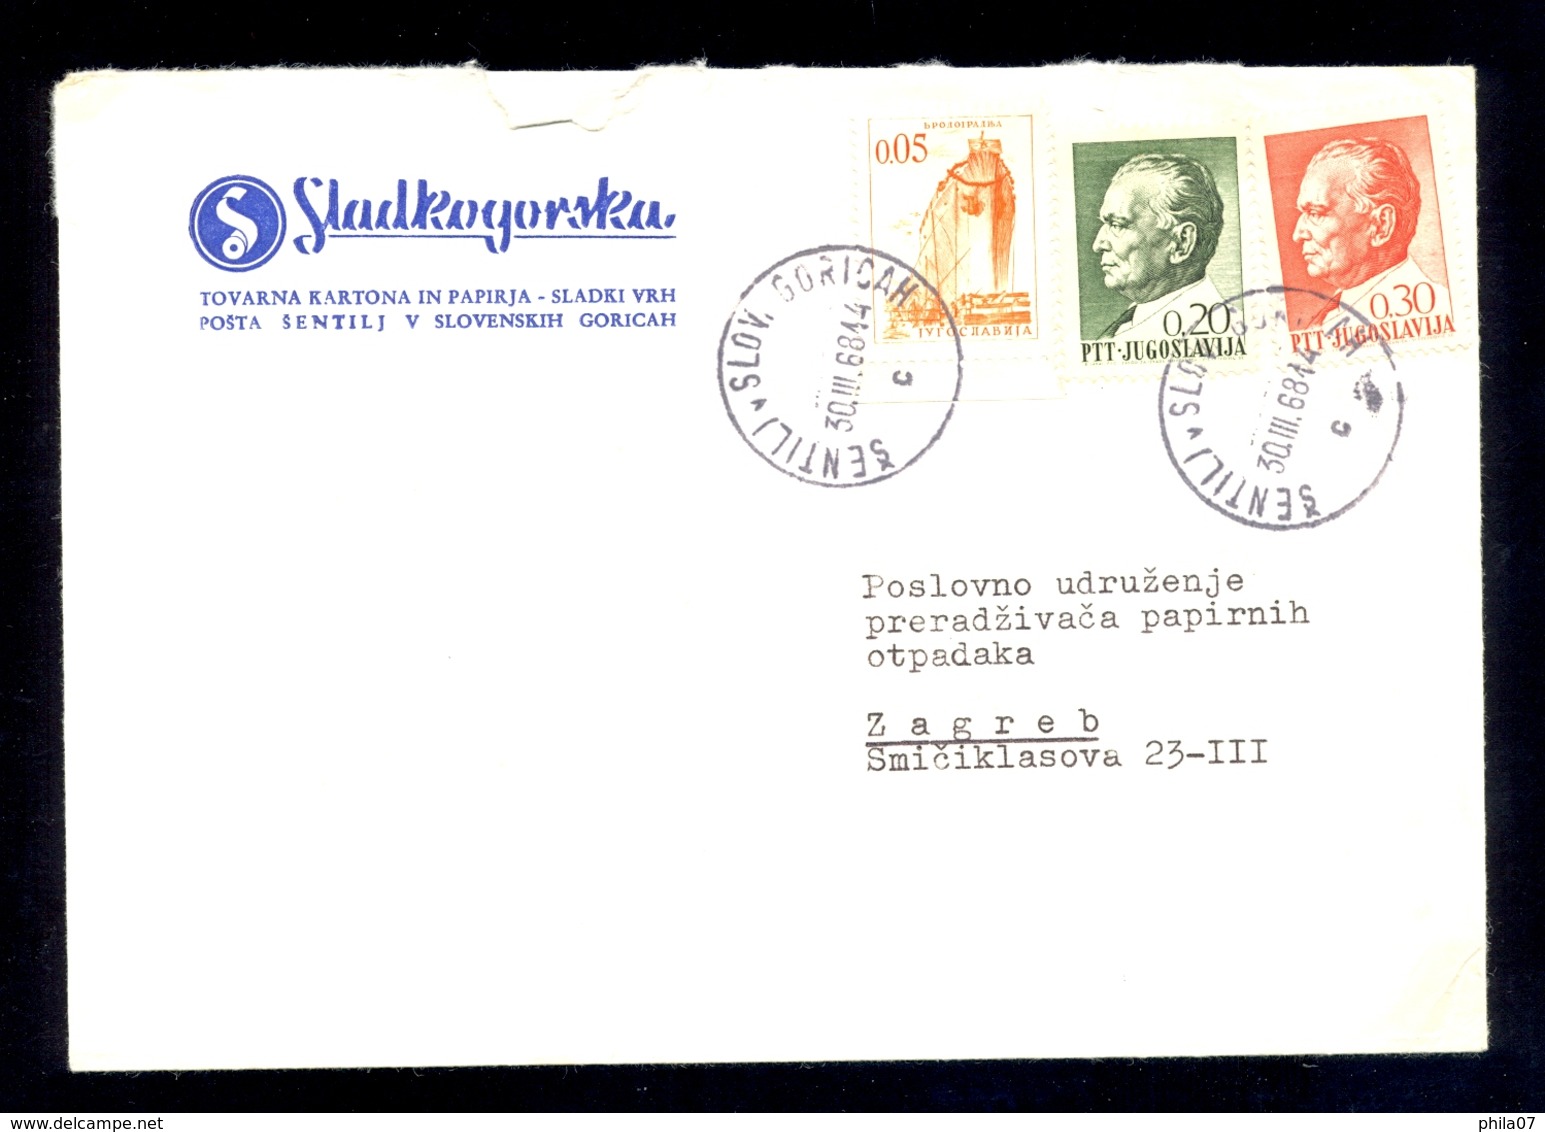 Slovenia, Yugoslavia - 4 letters sent from various Slovenia firms, with headers on the envelops.